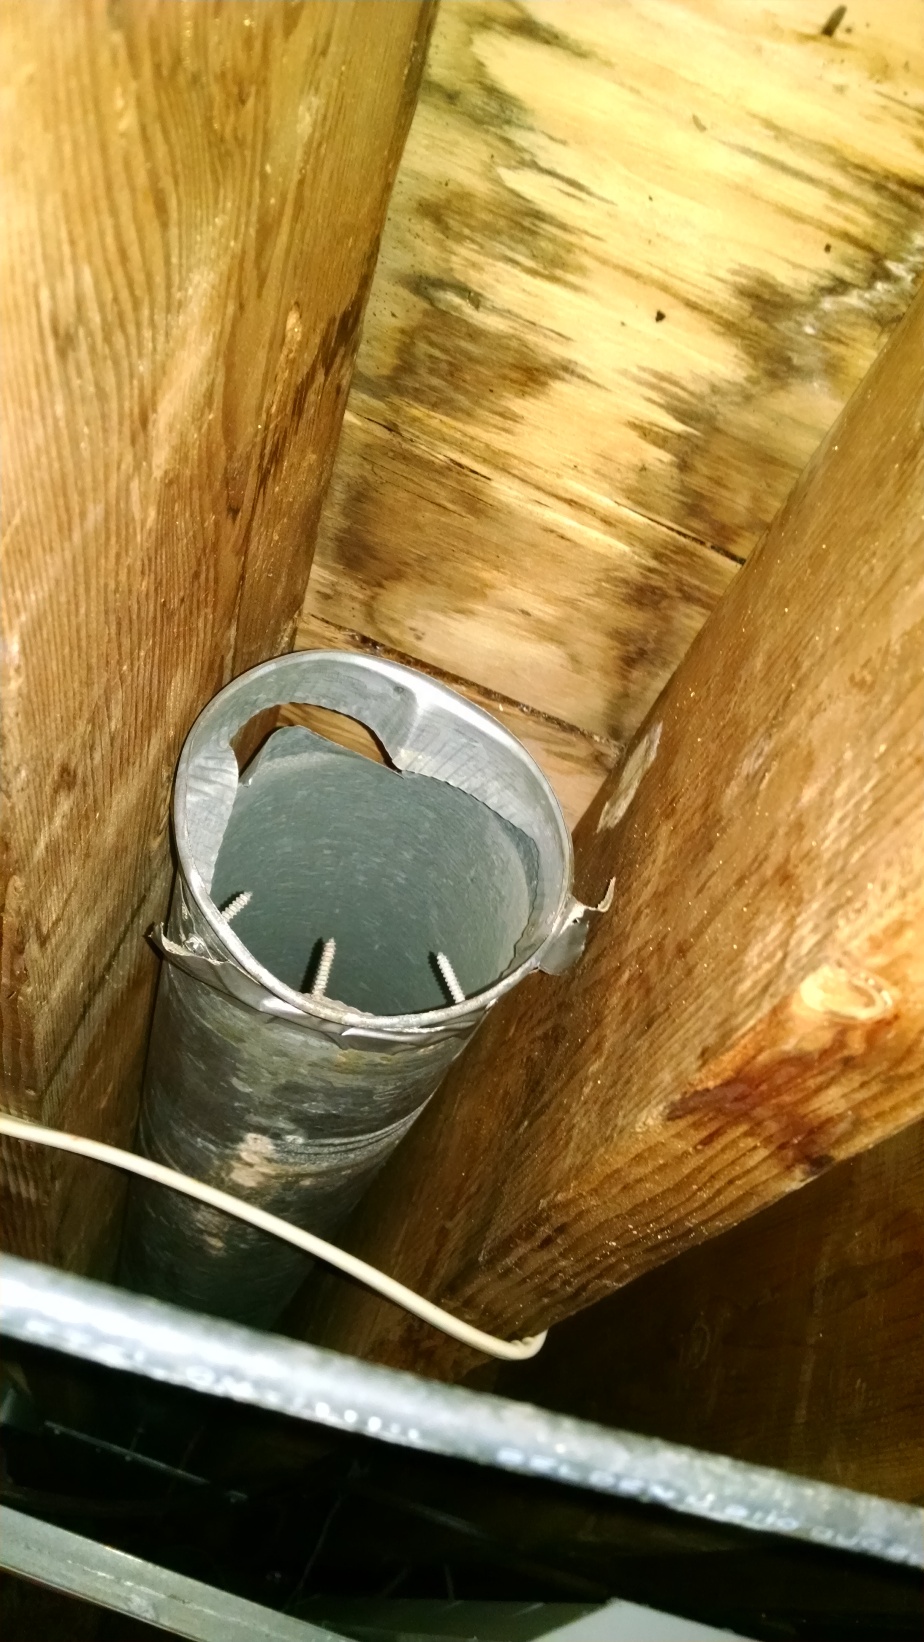 HVAC duct venting above drop ceiling